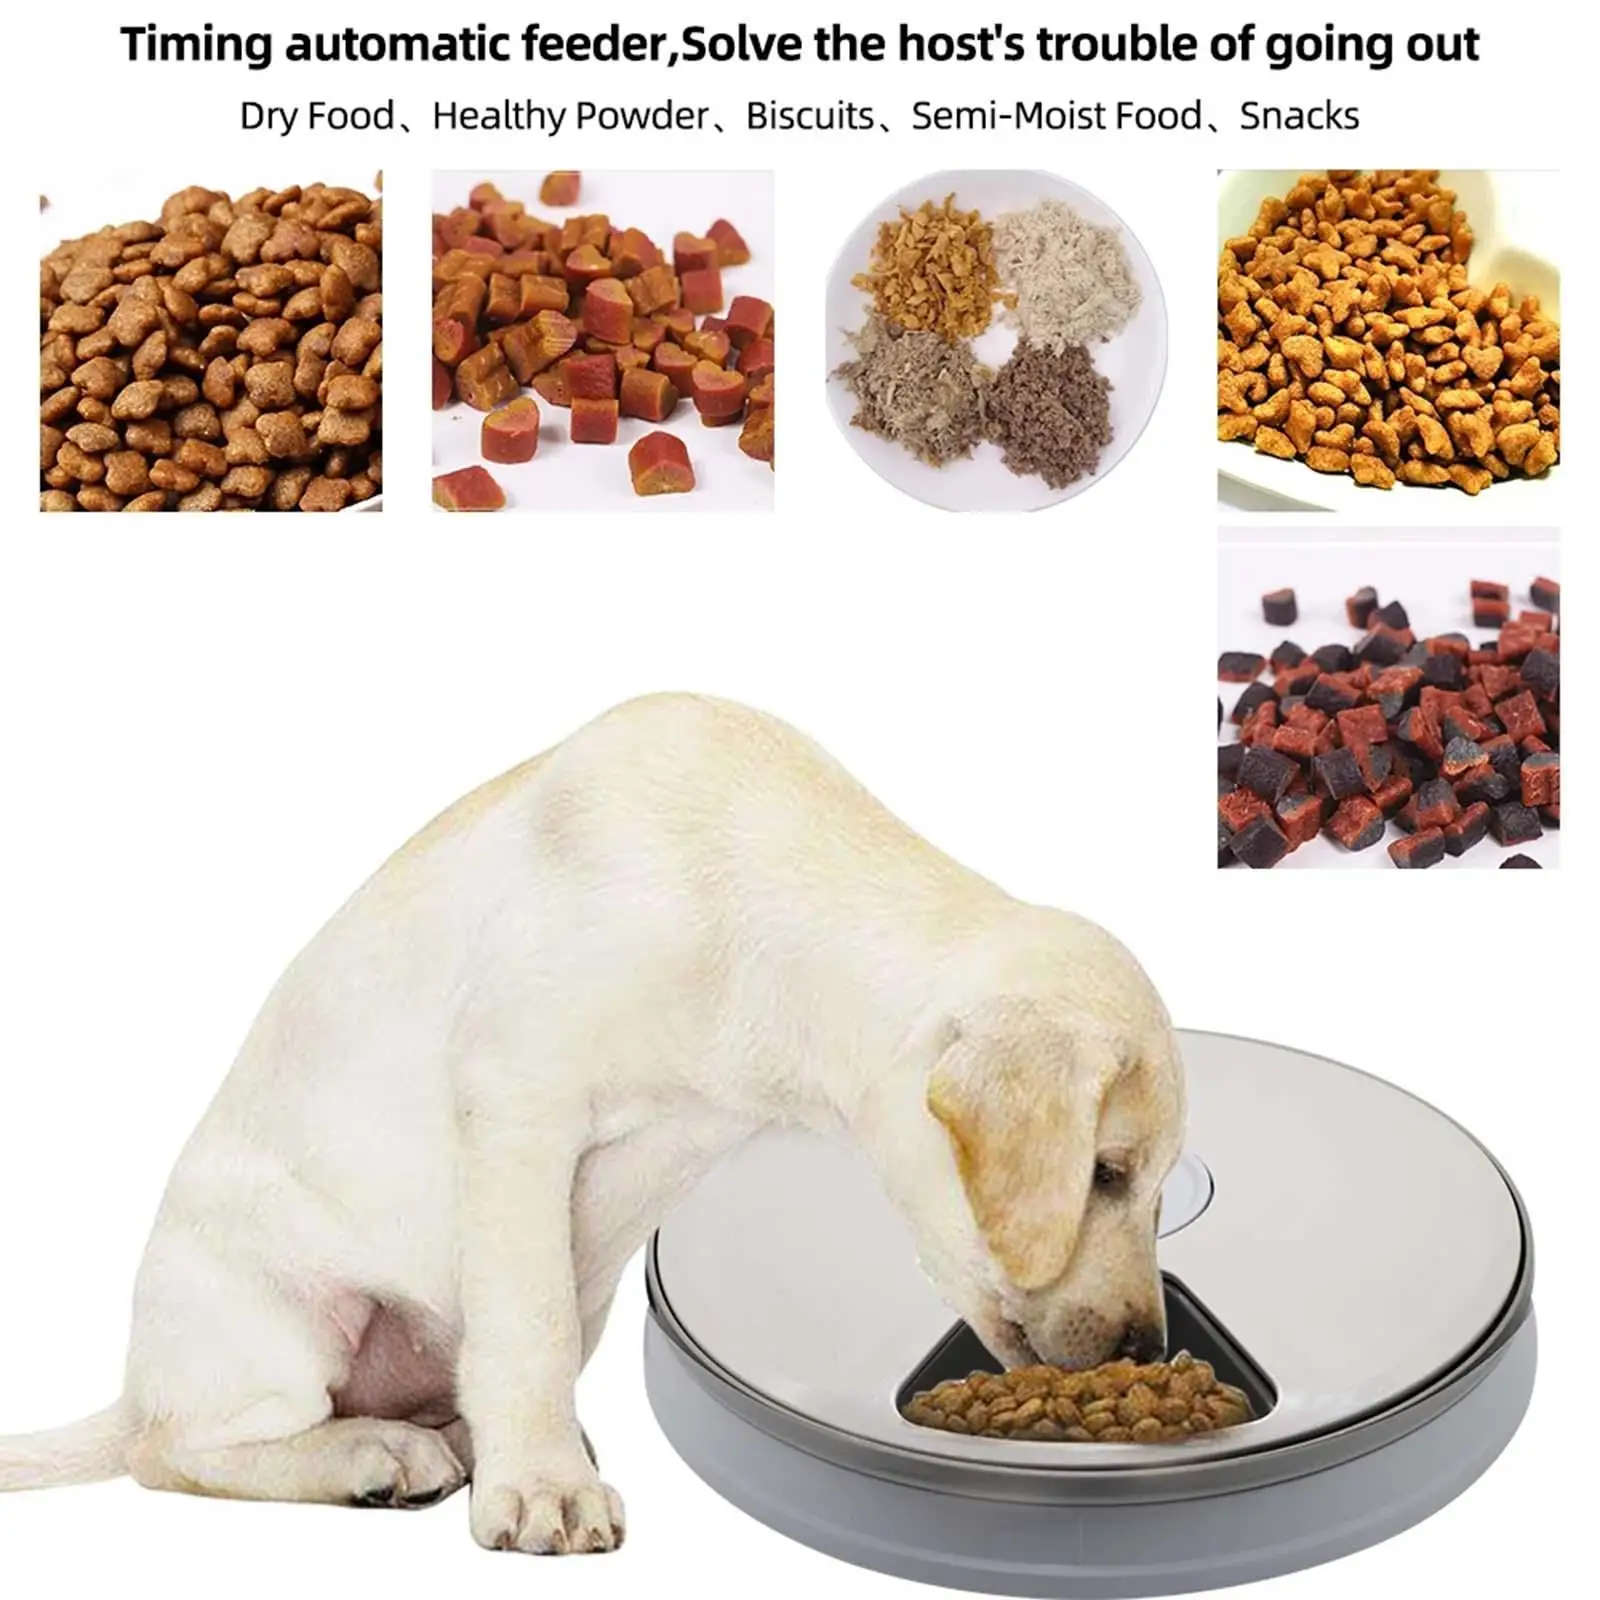 Automatic Pet Feeder 6 Grids Bowl 24H Timer Feeding Product Food Container